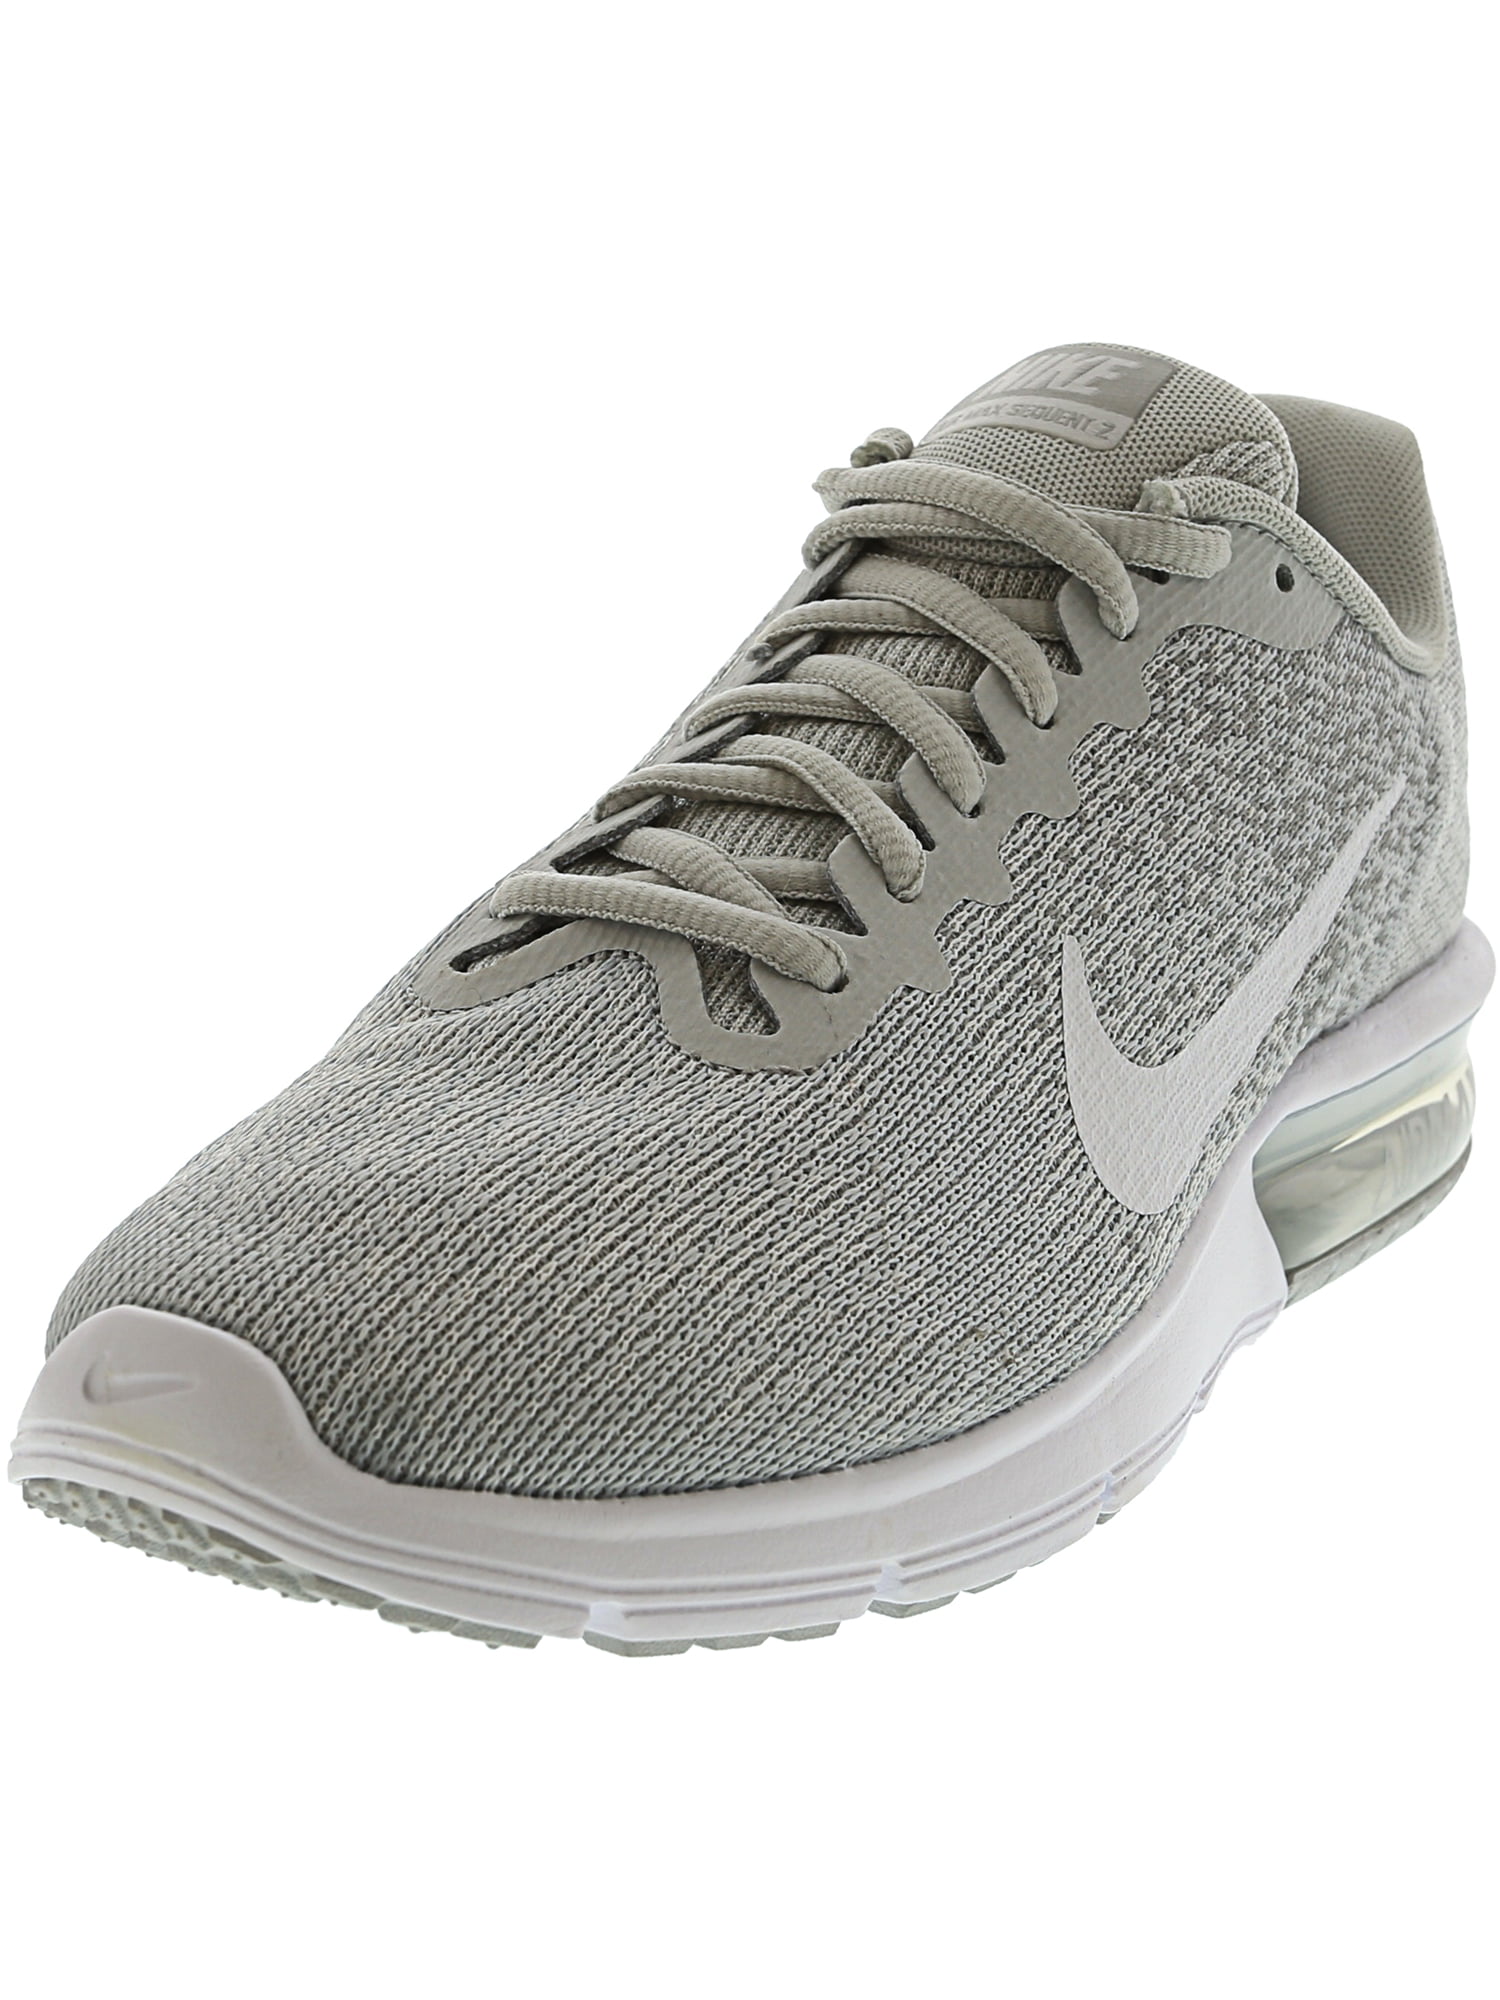 nike air max sequent wolf grey